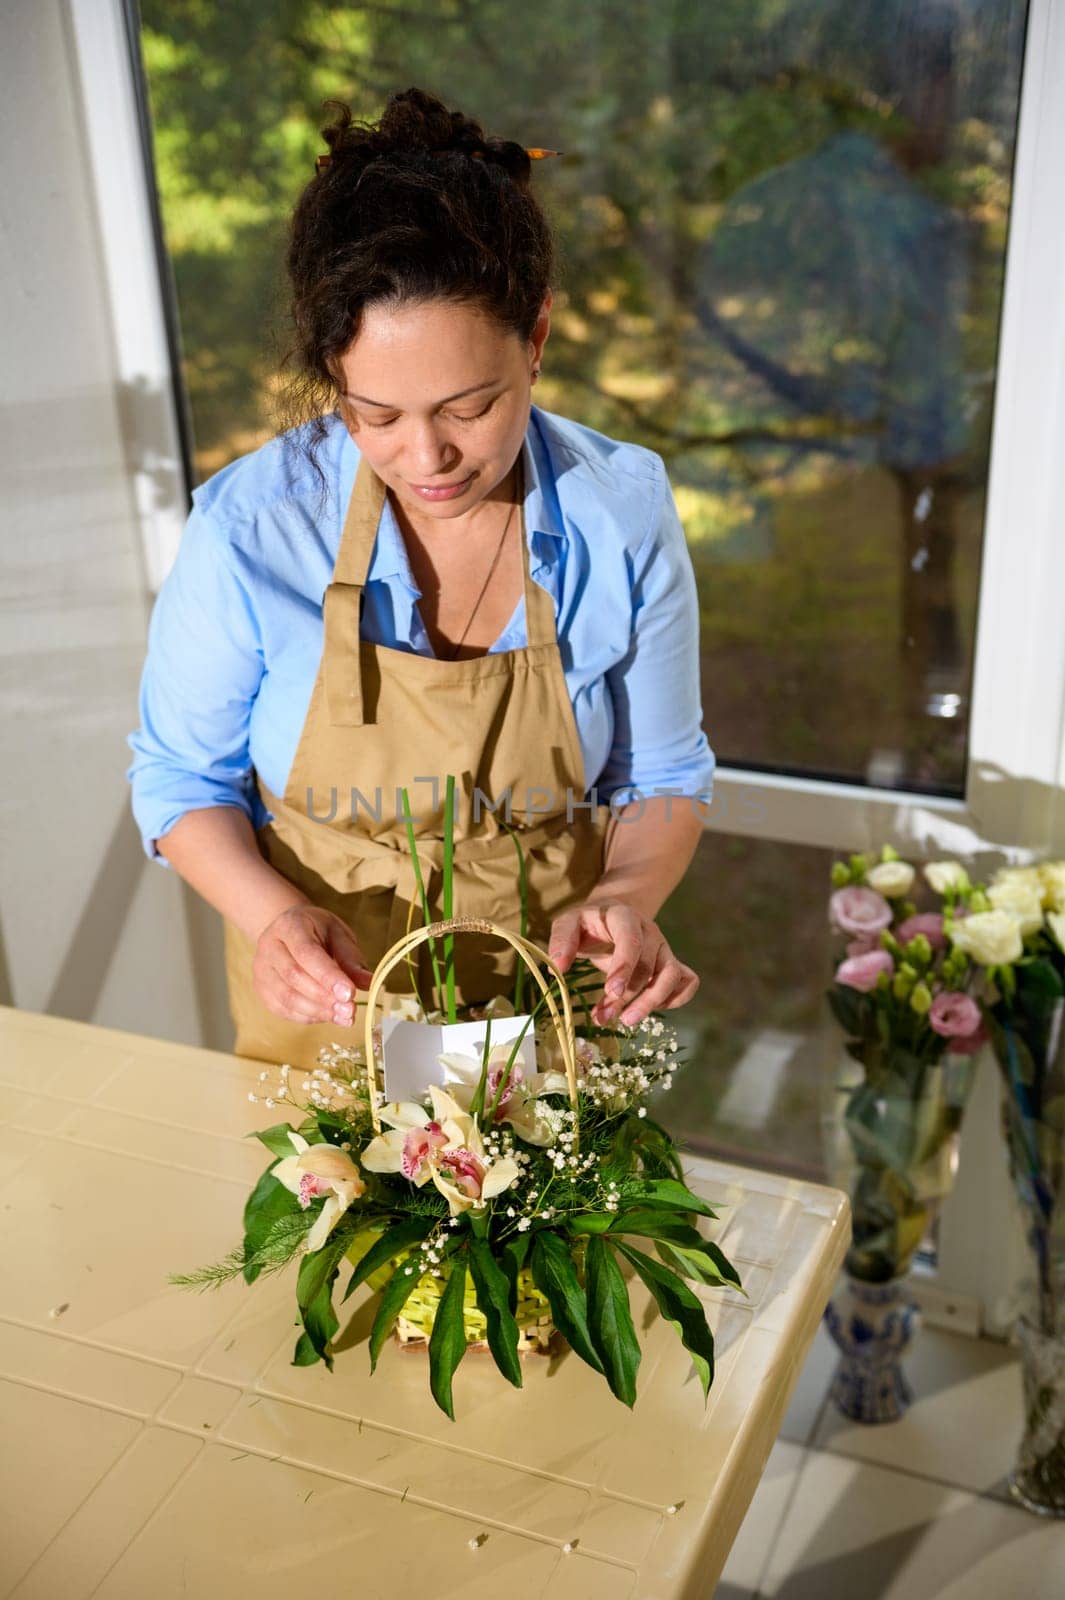 Overhead view of a female florist creating a flower arrangement with fresh orchid flowers and plants, inserting a birthday card for special festive life event, with copy space, in floral design studio